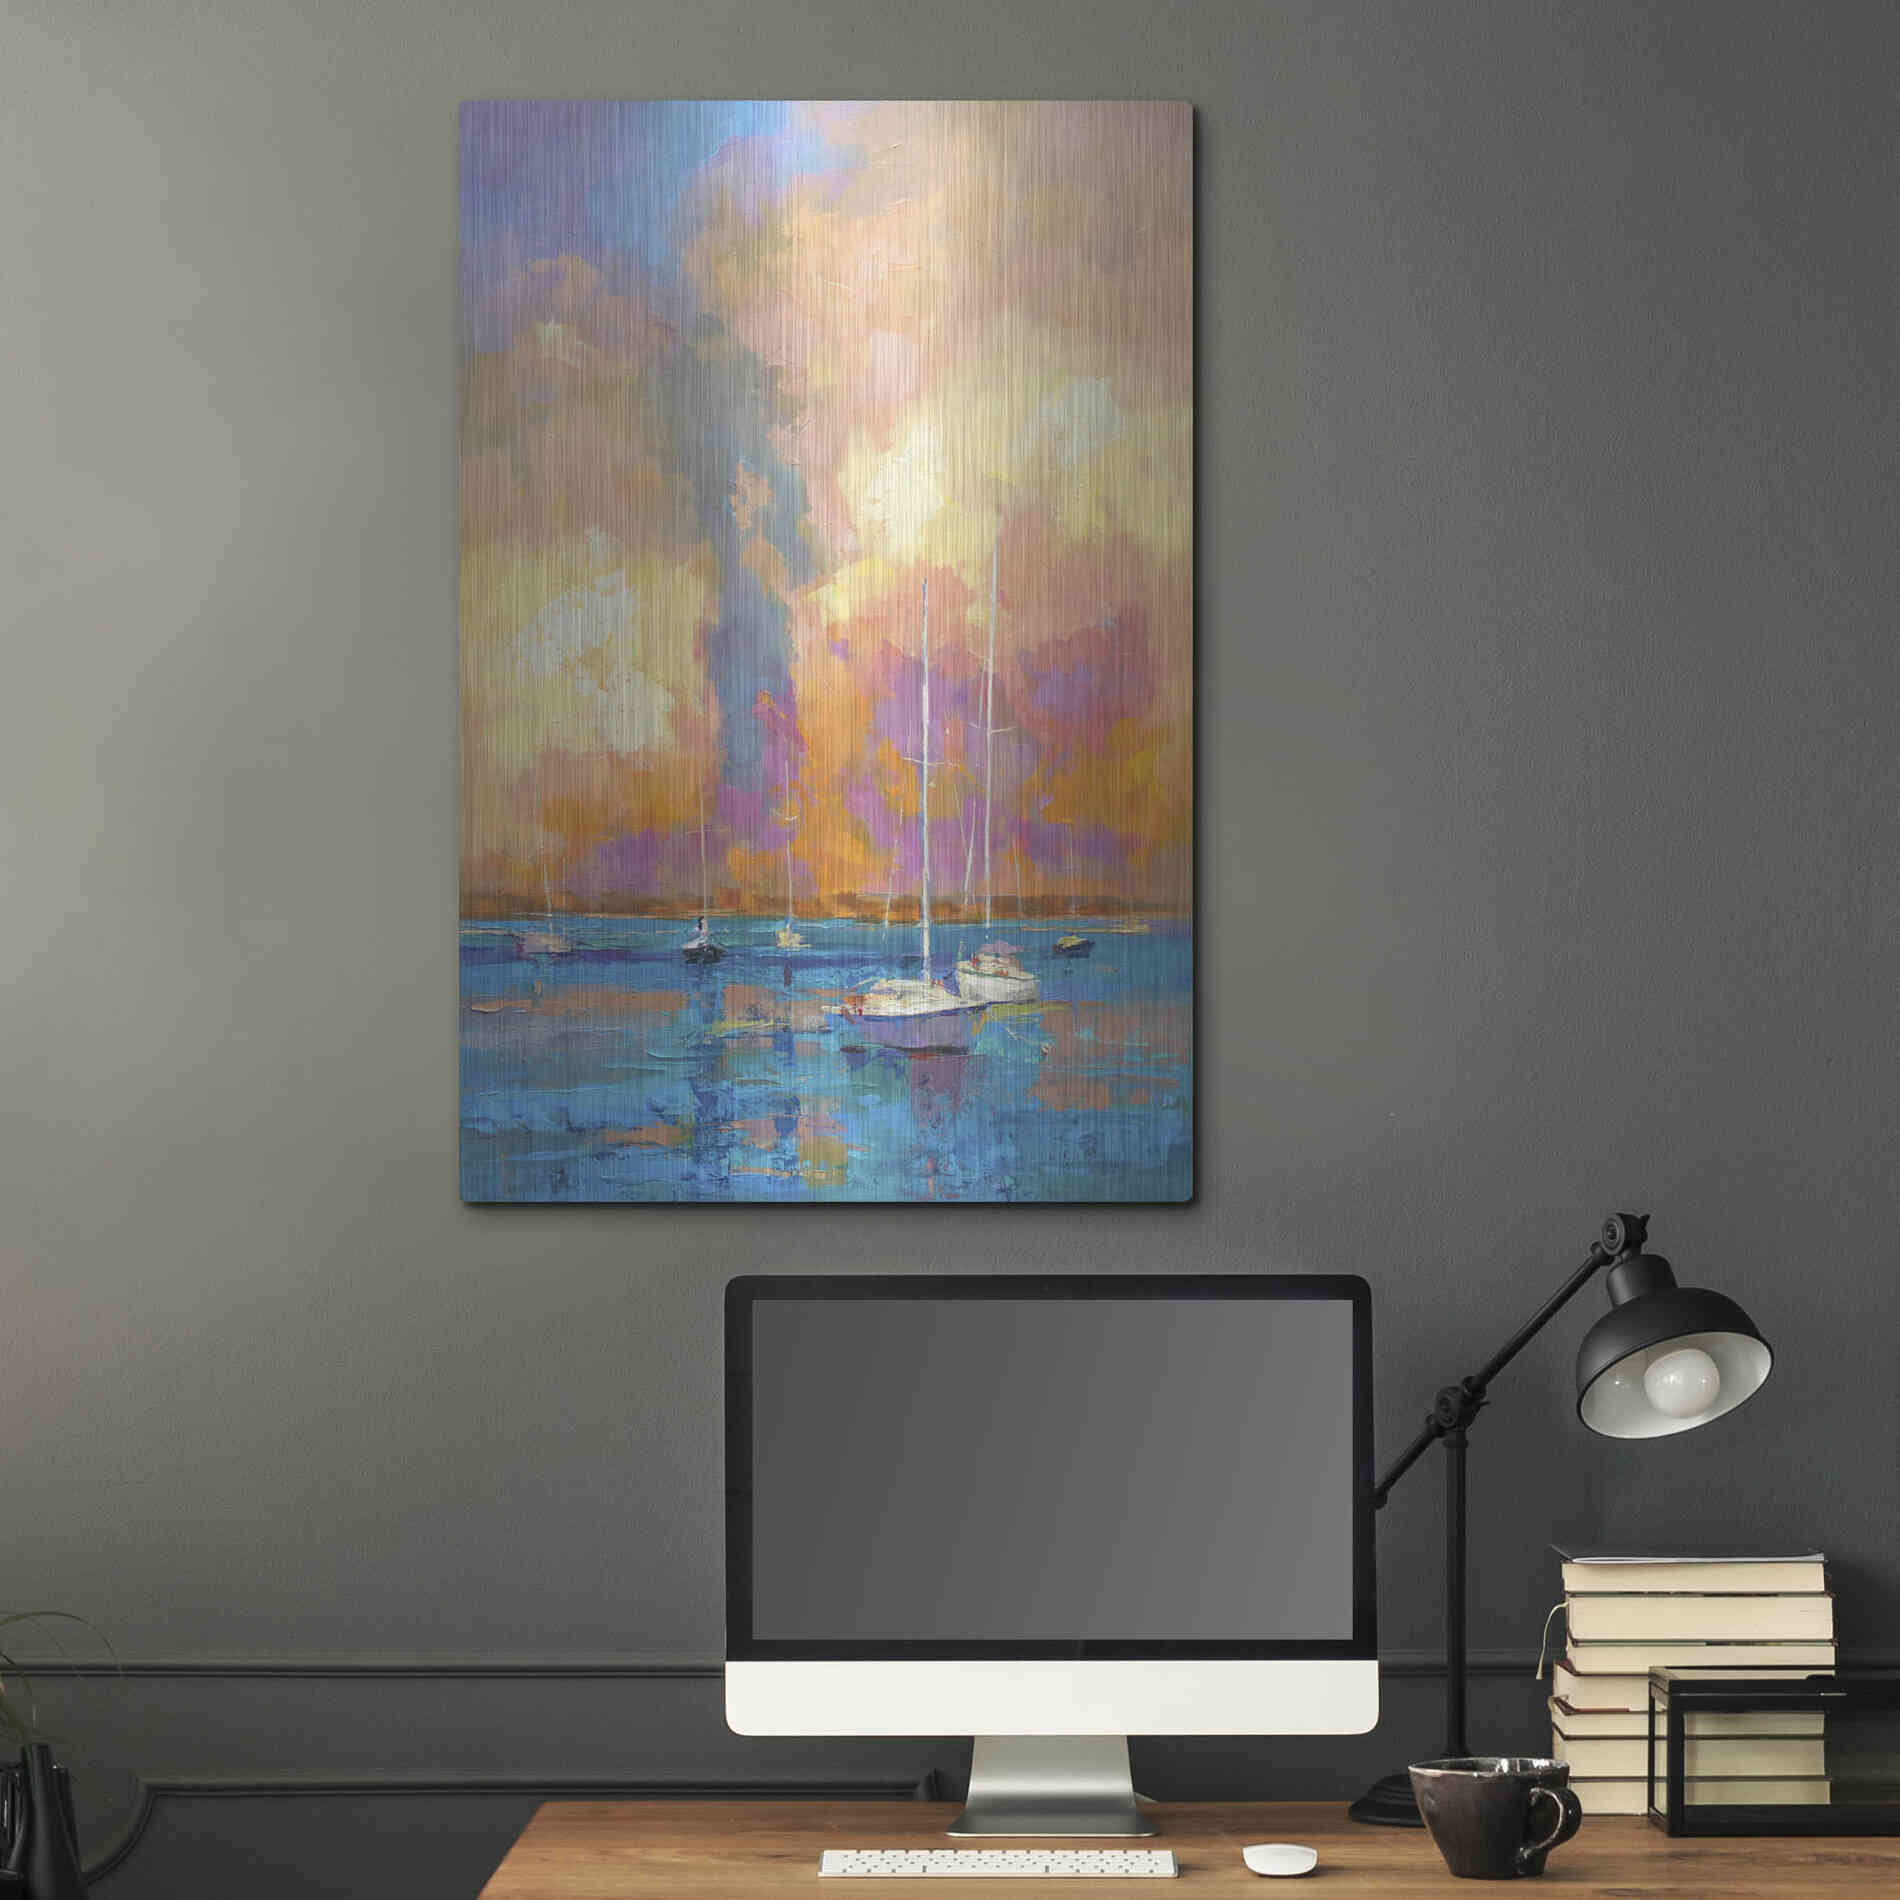 Luxe Metal Art 'Evening On The Bay' by Kasia Bruniany Metal Wall Art,24x36